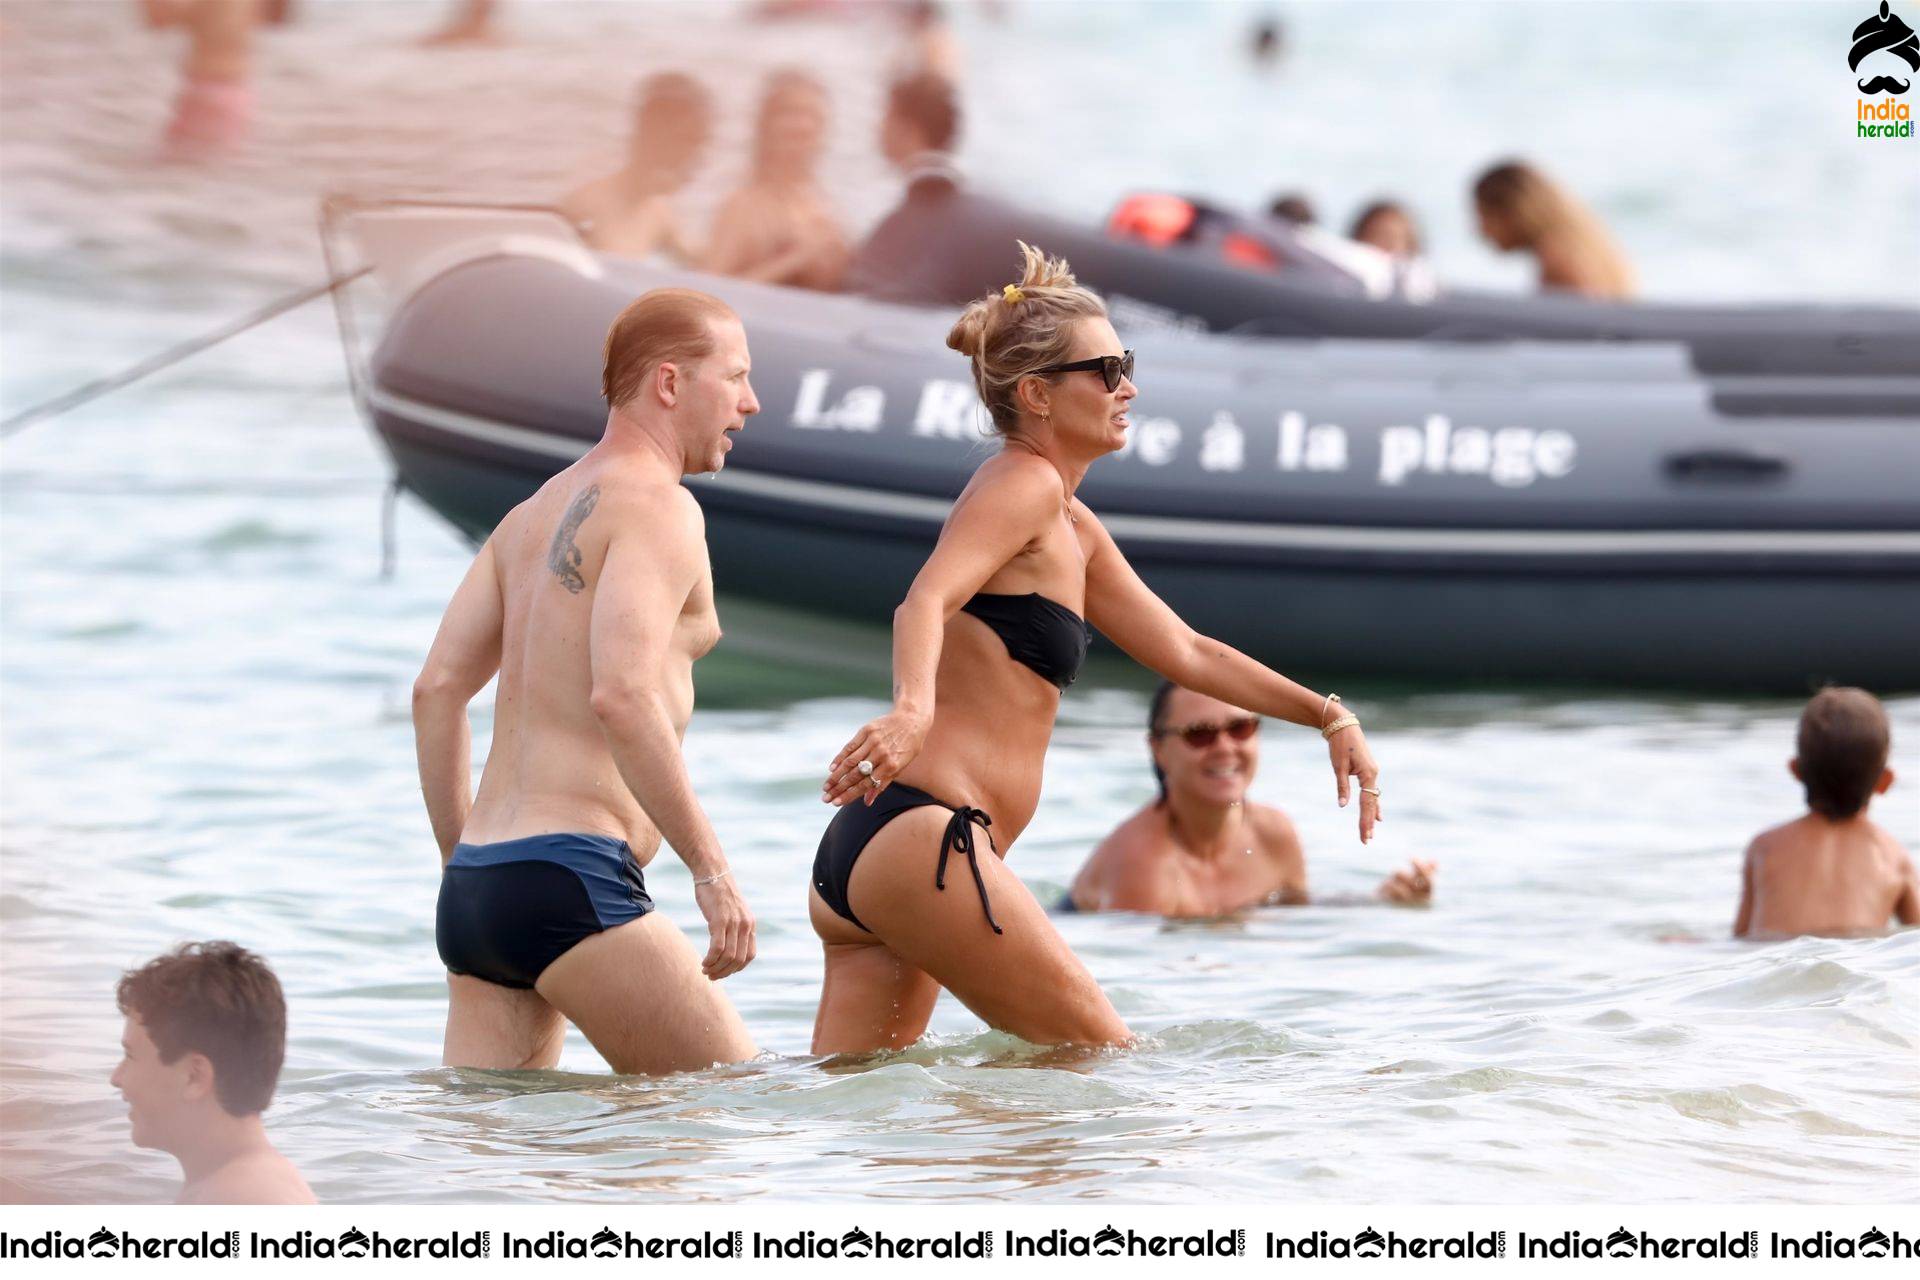 Kate Moss enjoys with her husband and caught in Bikini by beach side Set 1